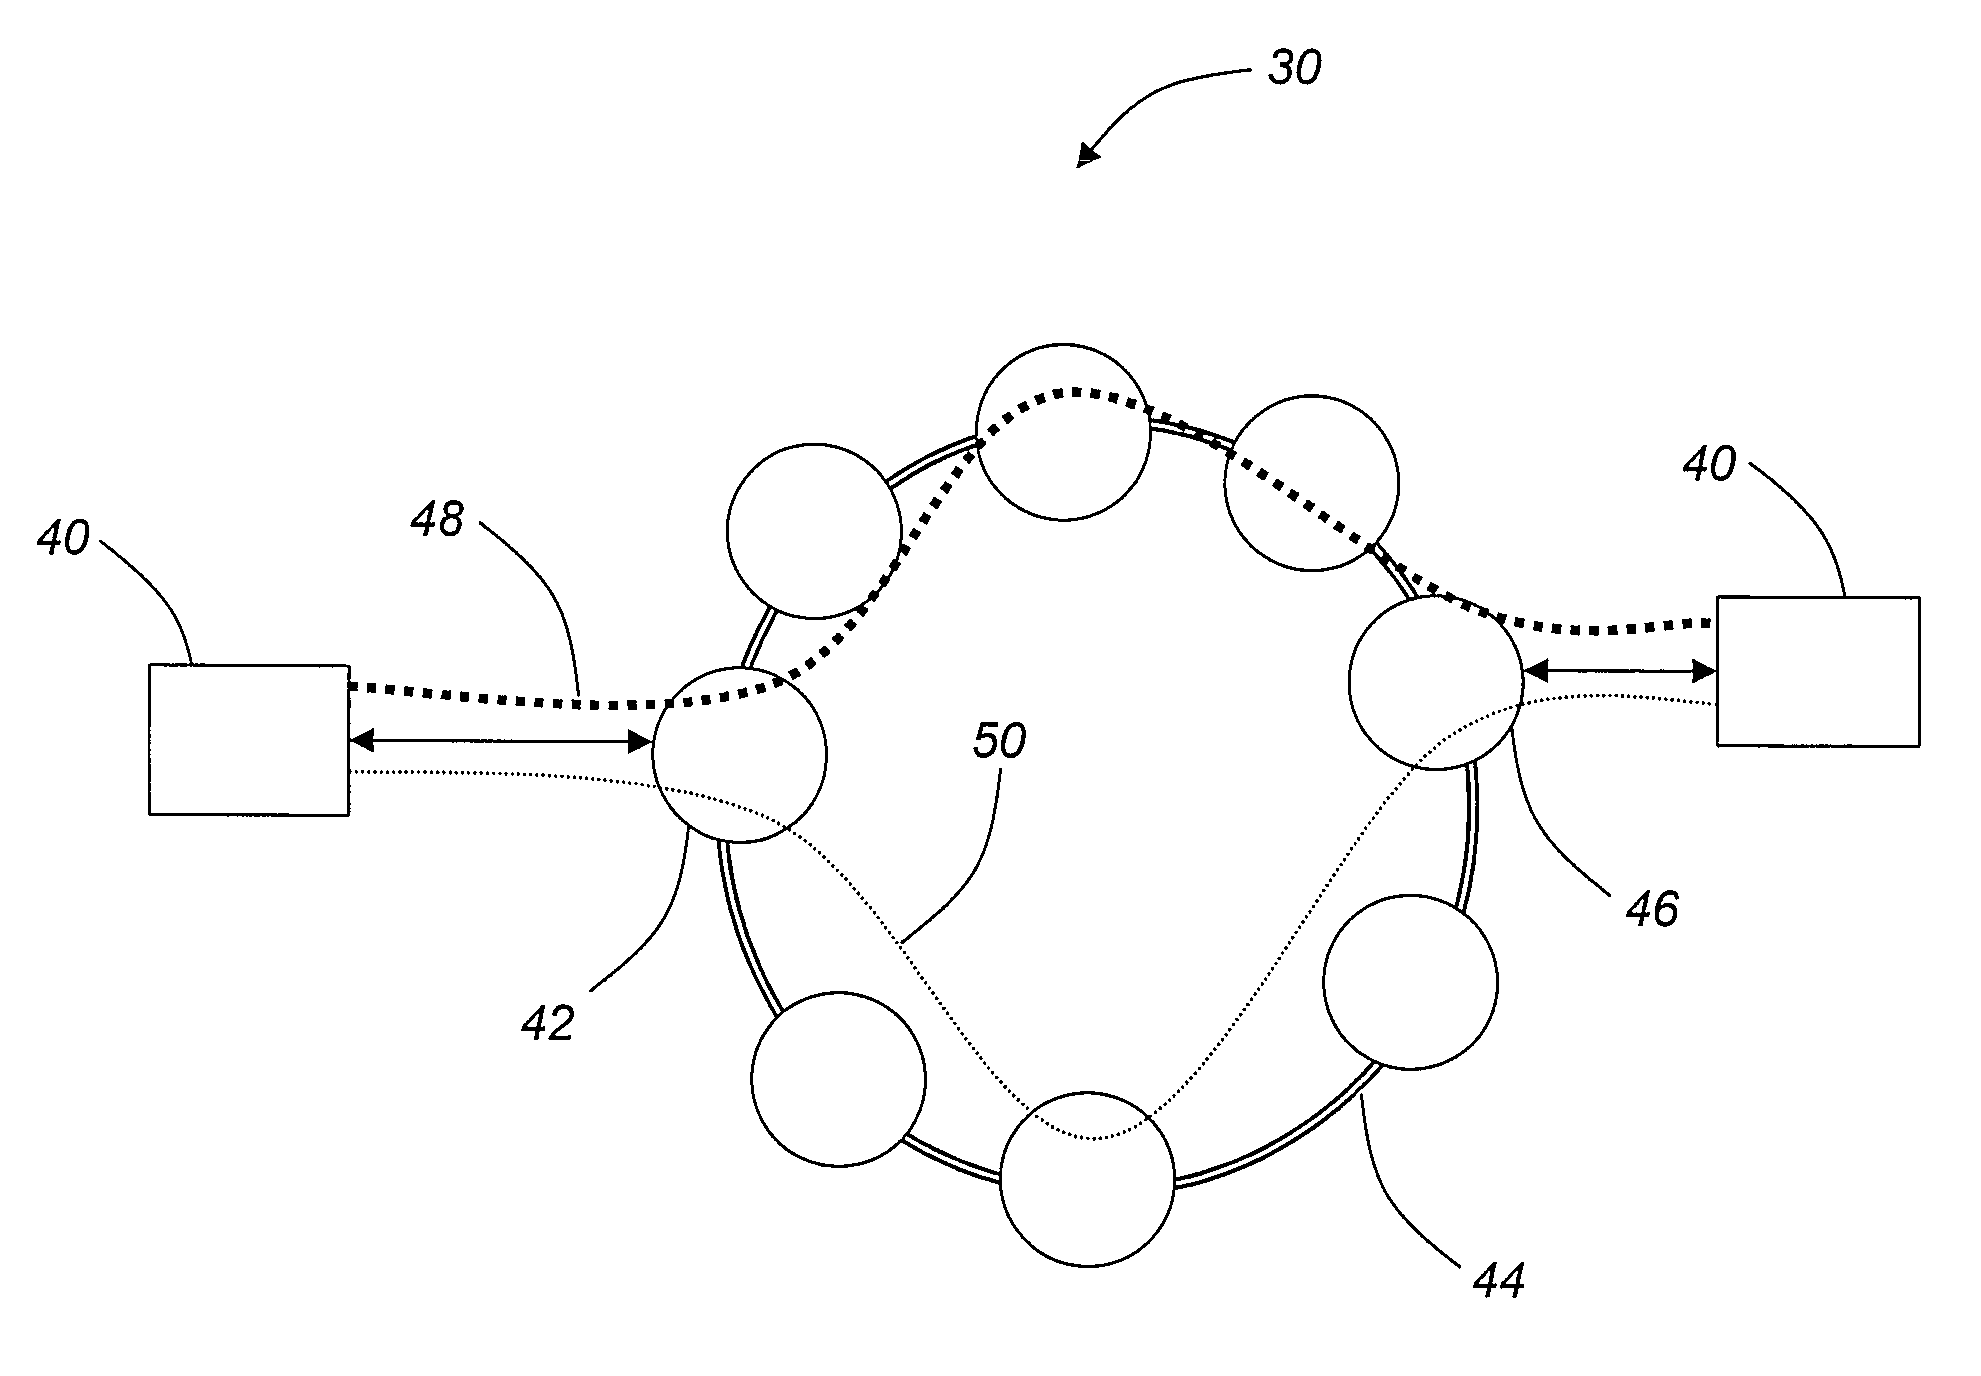 Systems and methods for a self-healing carrier ethernet topology